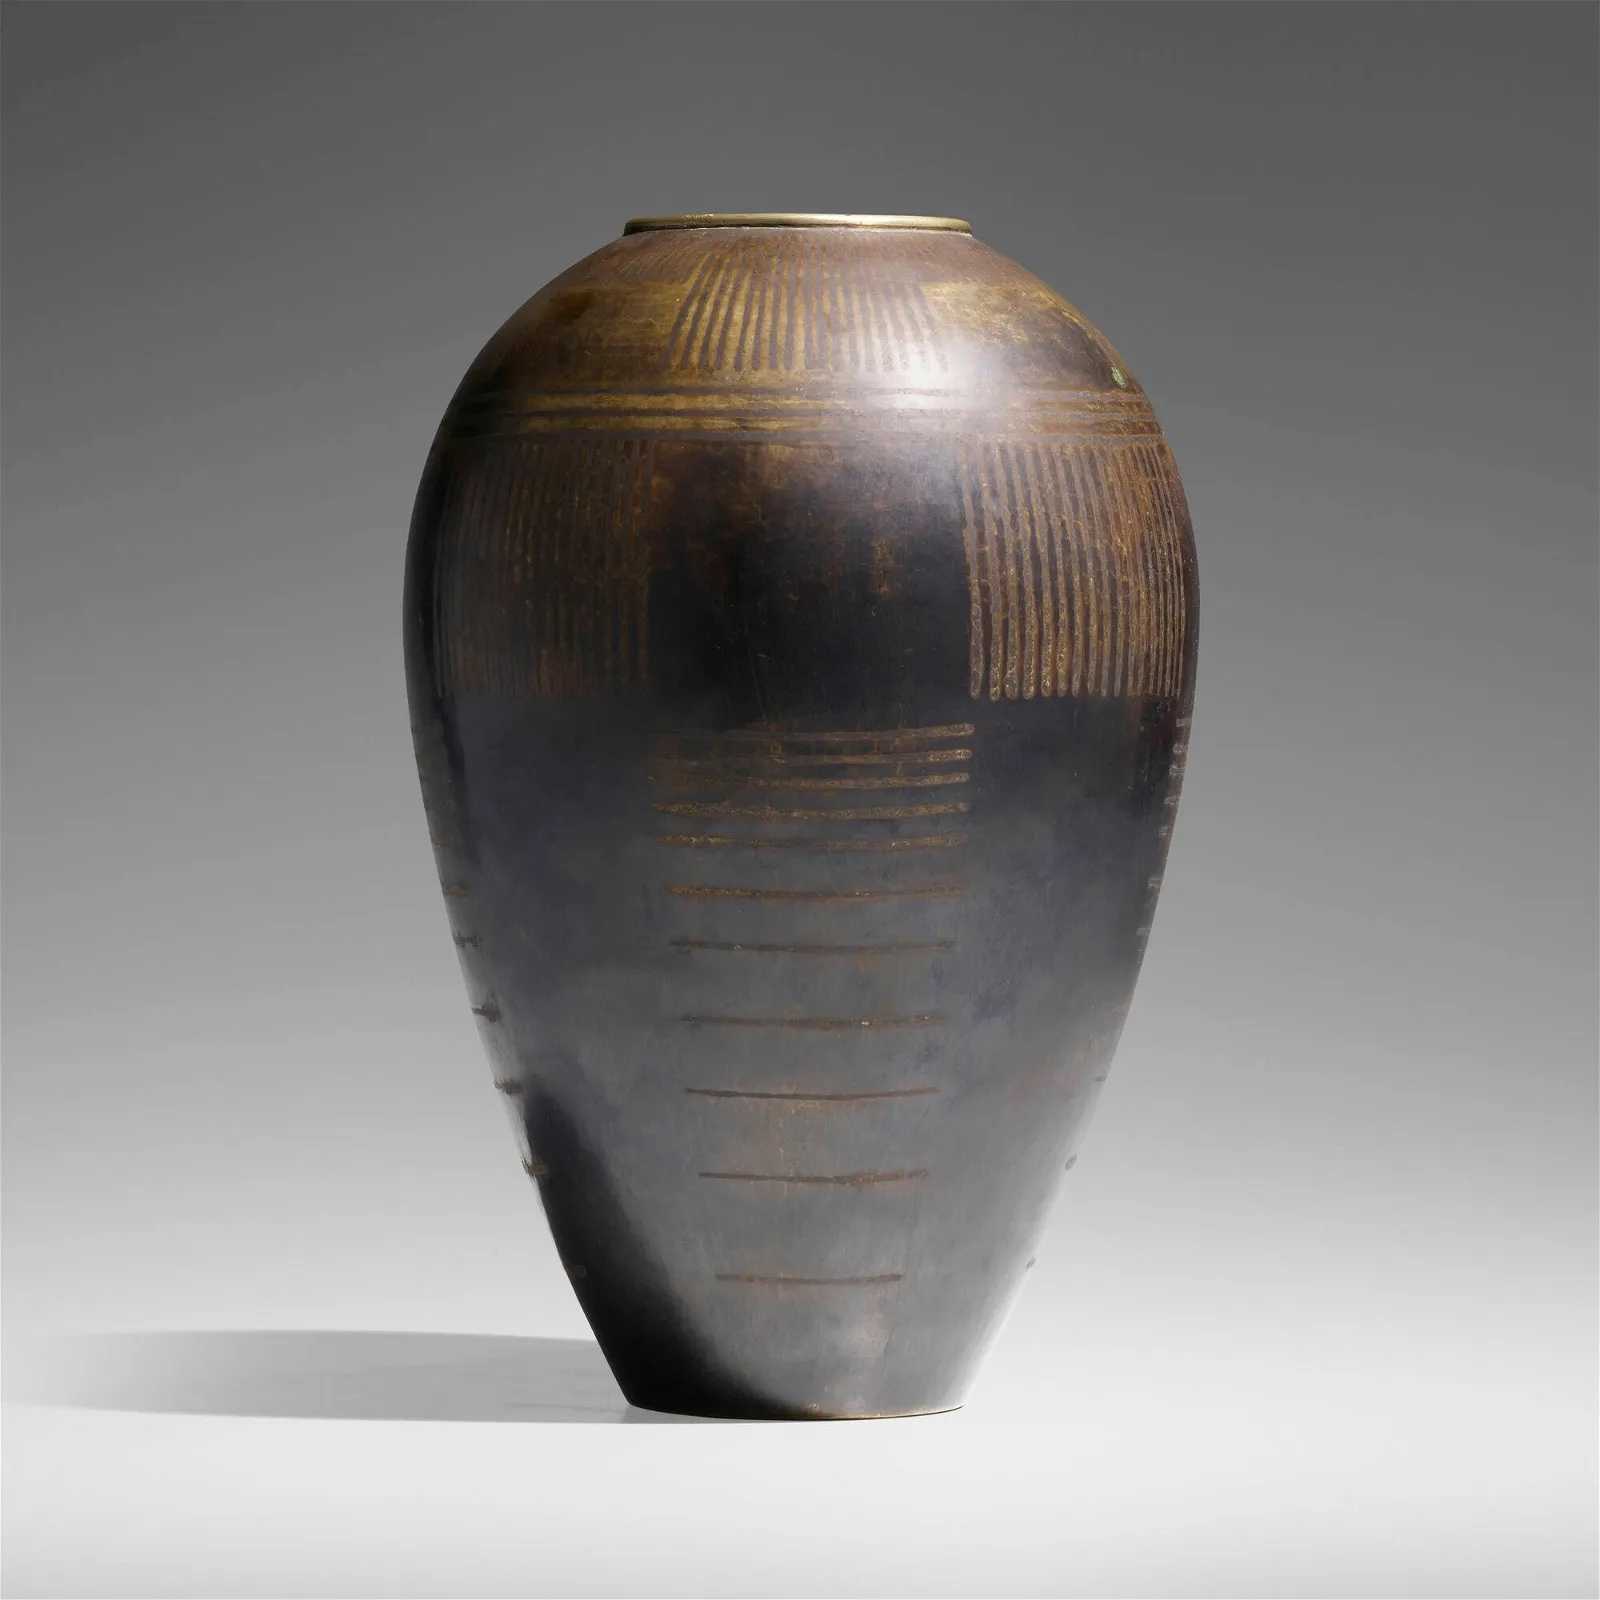 Circa-1920 Dinanderie vase by Jean Dunand, which sold for $27,510 with buyer’s premium at Rago.